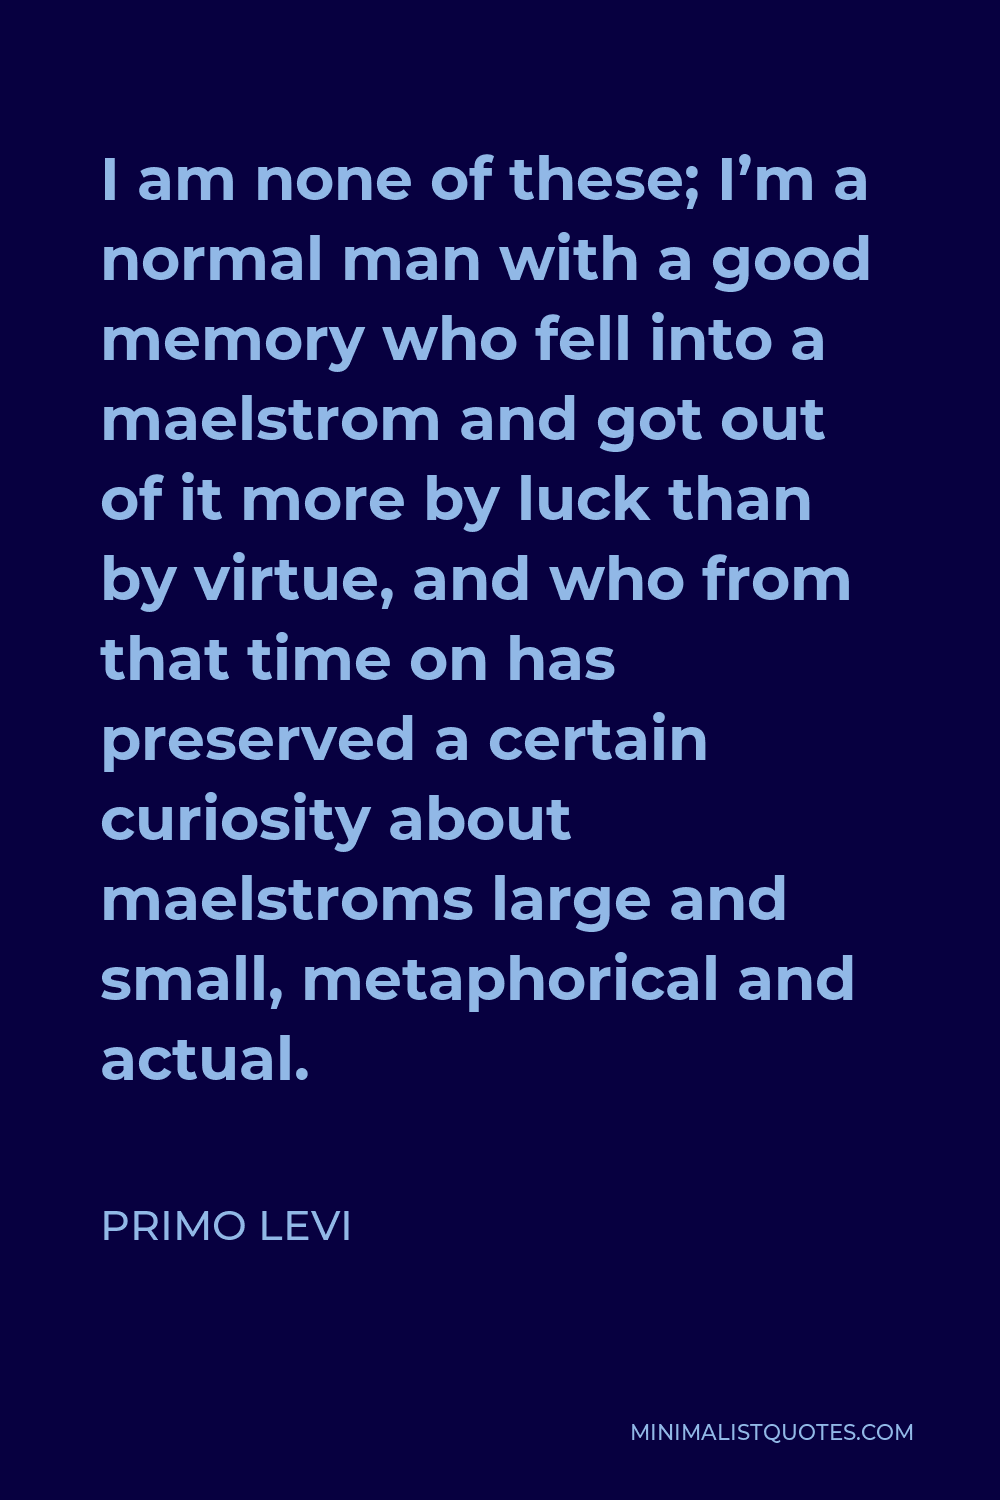 Primo Levi Quote - I am none of these; I’m a normal man with a good memory who fell into a maelstrom and got out of it more by luck than by virtue, and who from that time on has preserved a certain curiosity about maelstroms large and small, metaphorical and actual.